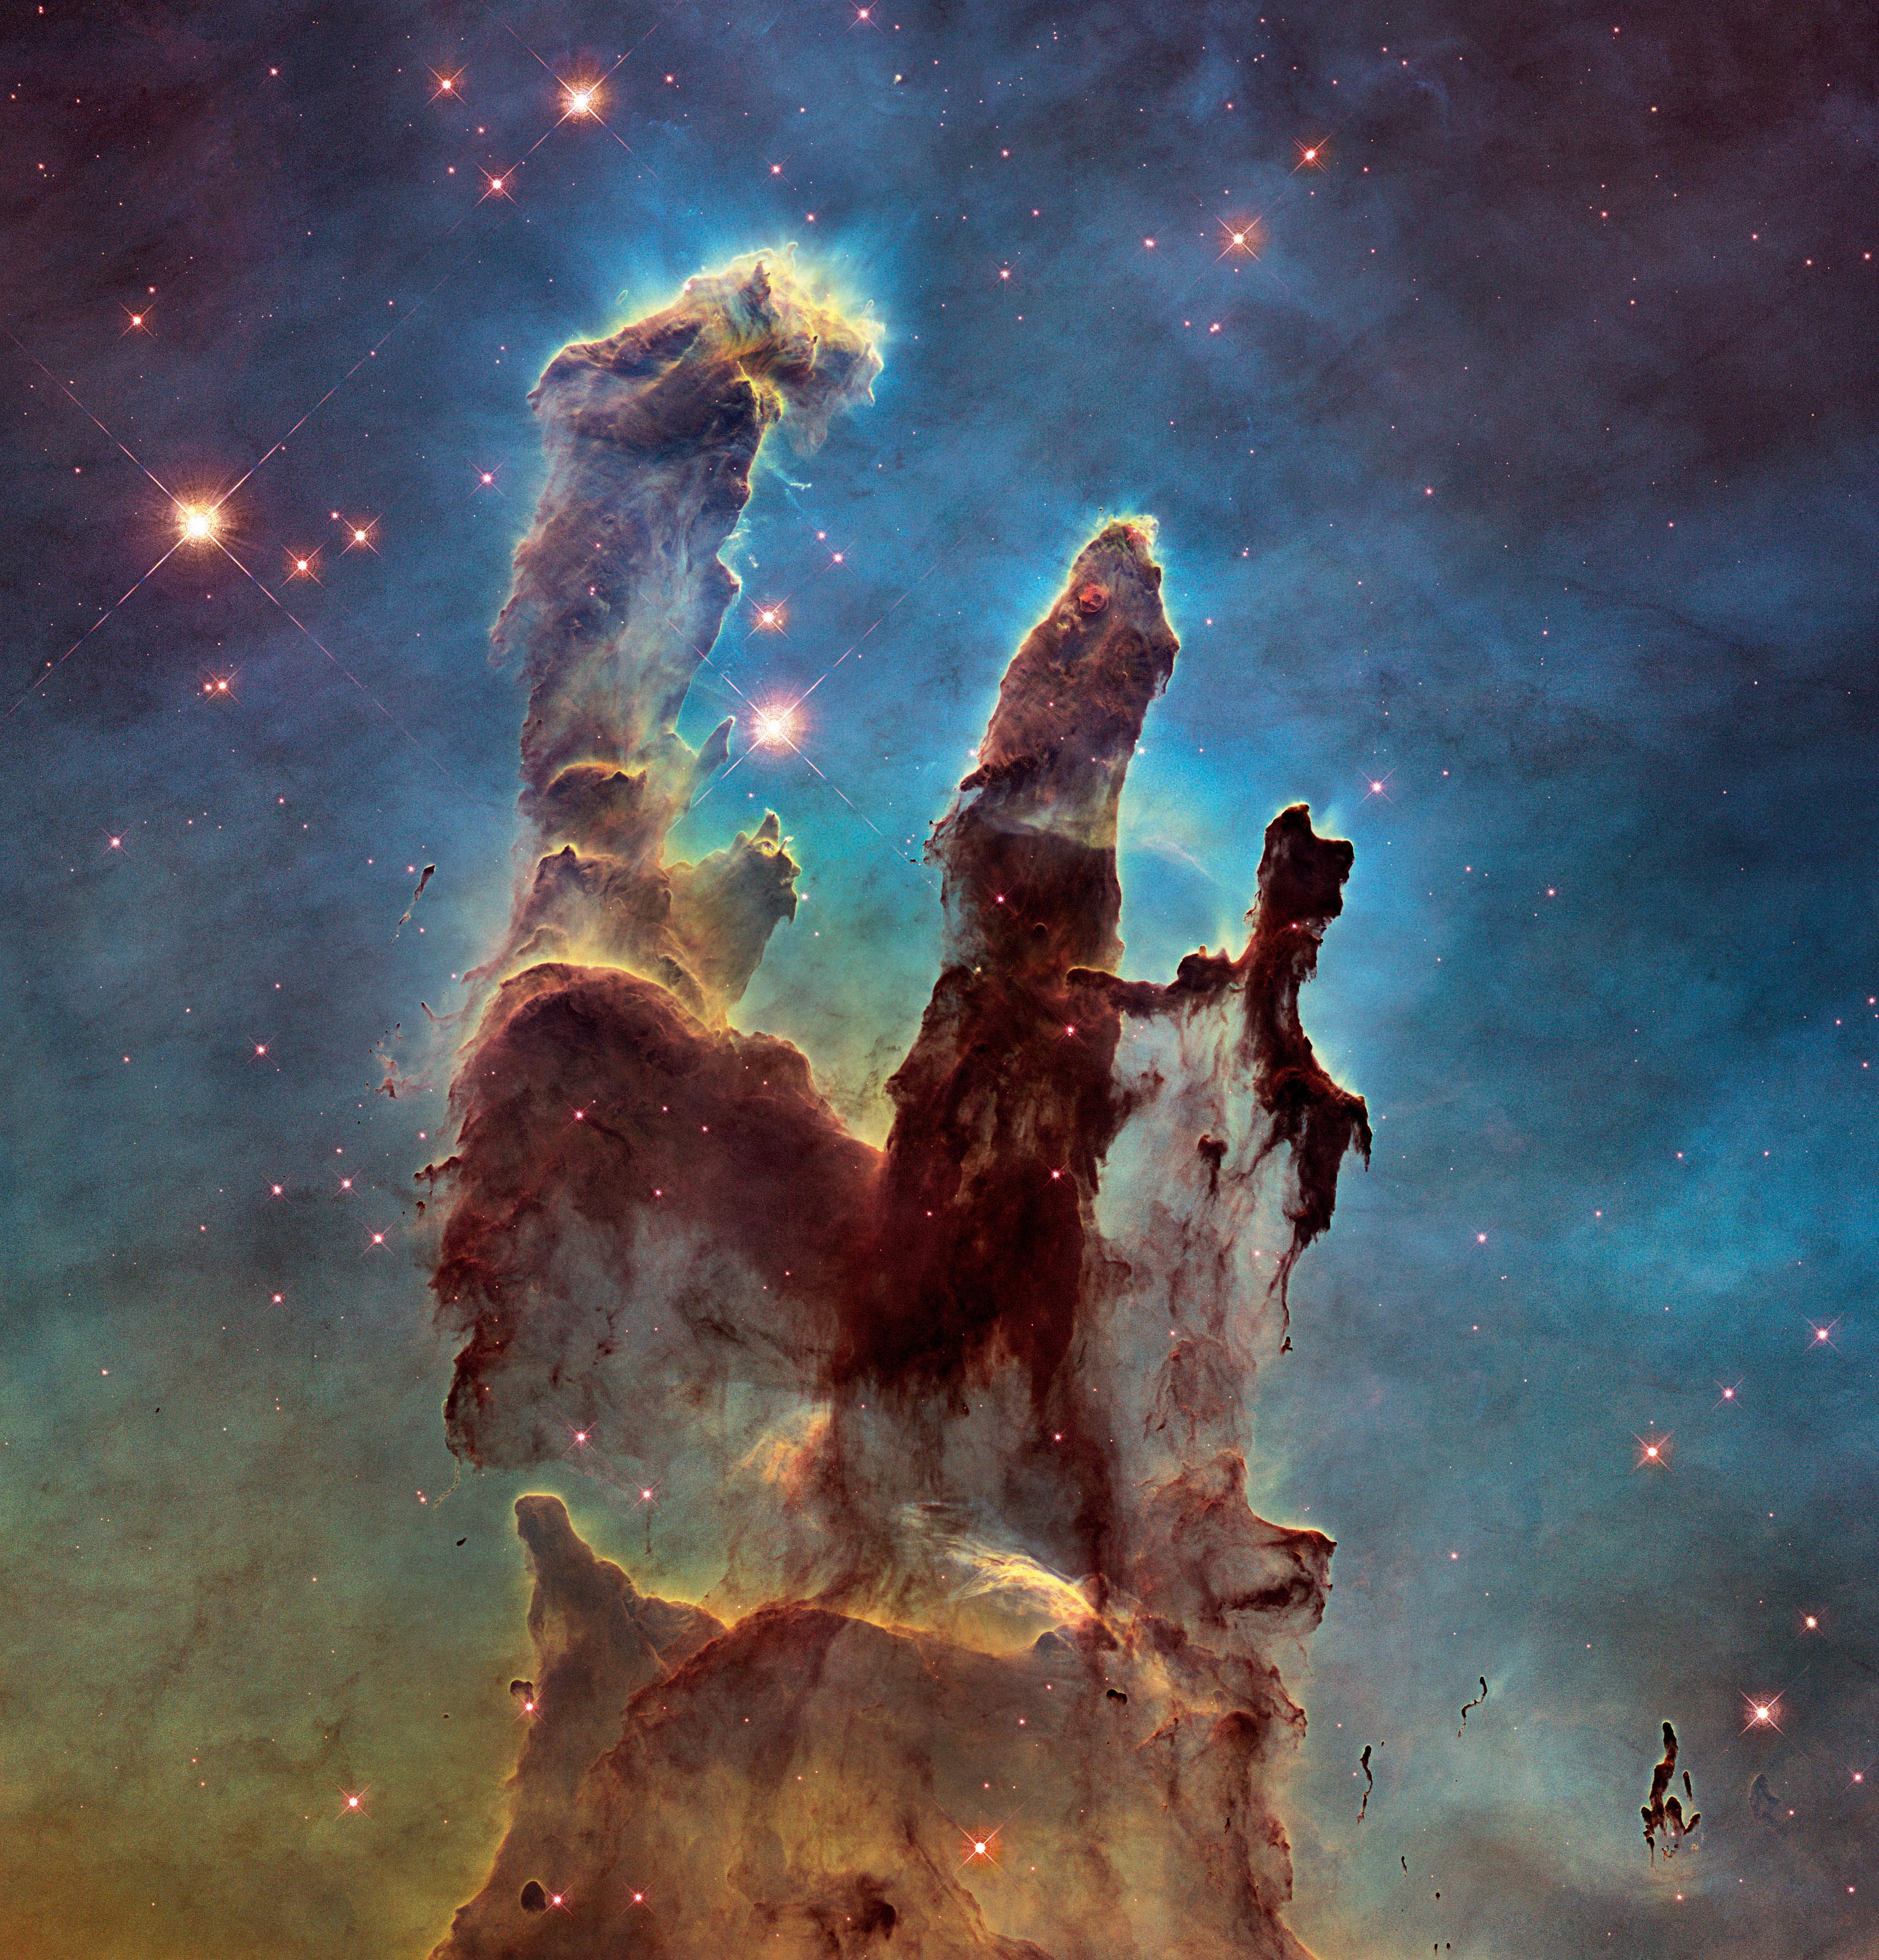 hubble current view